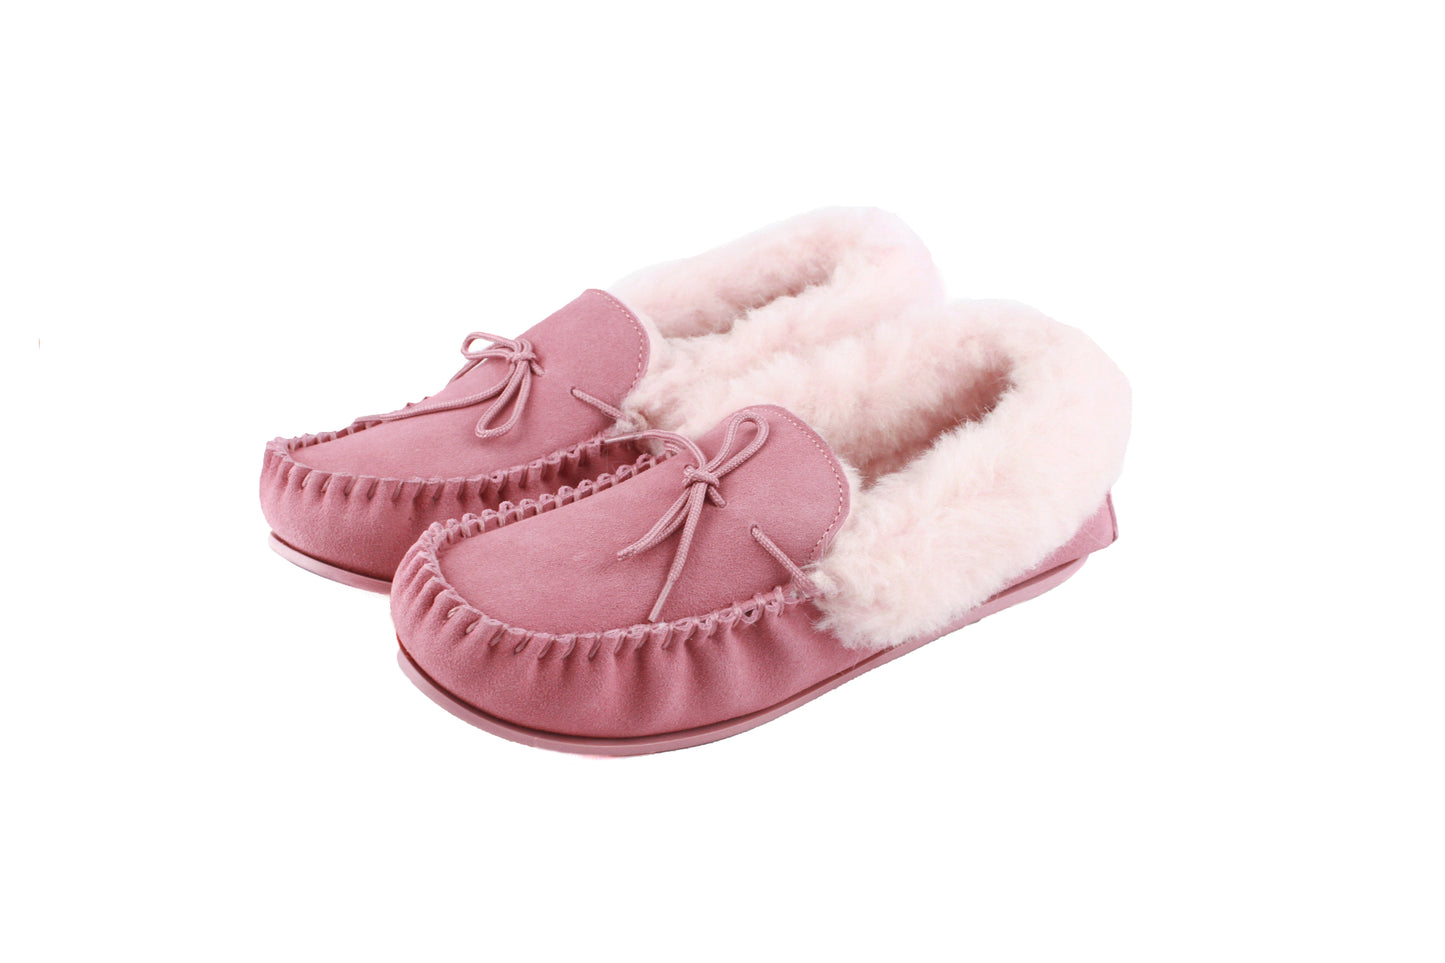 Blush Pink Willow Moccasin slippers